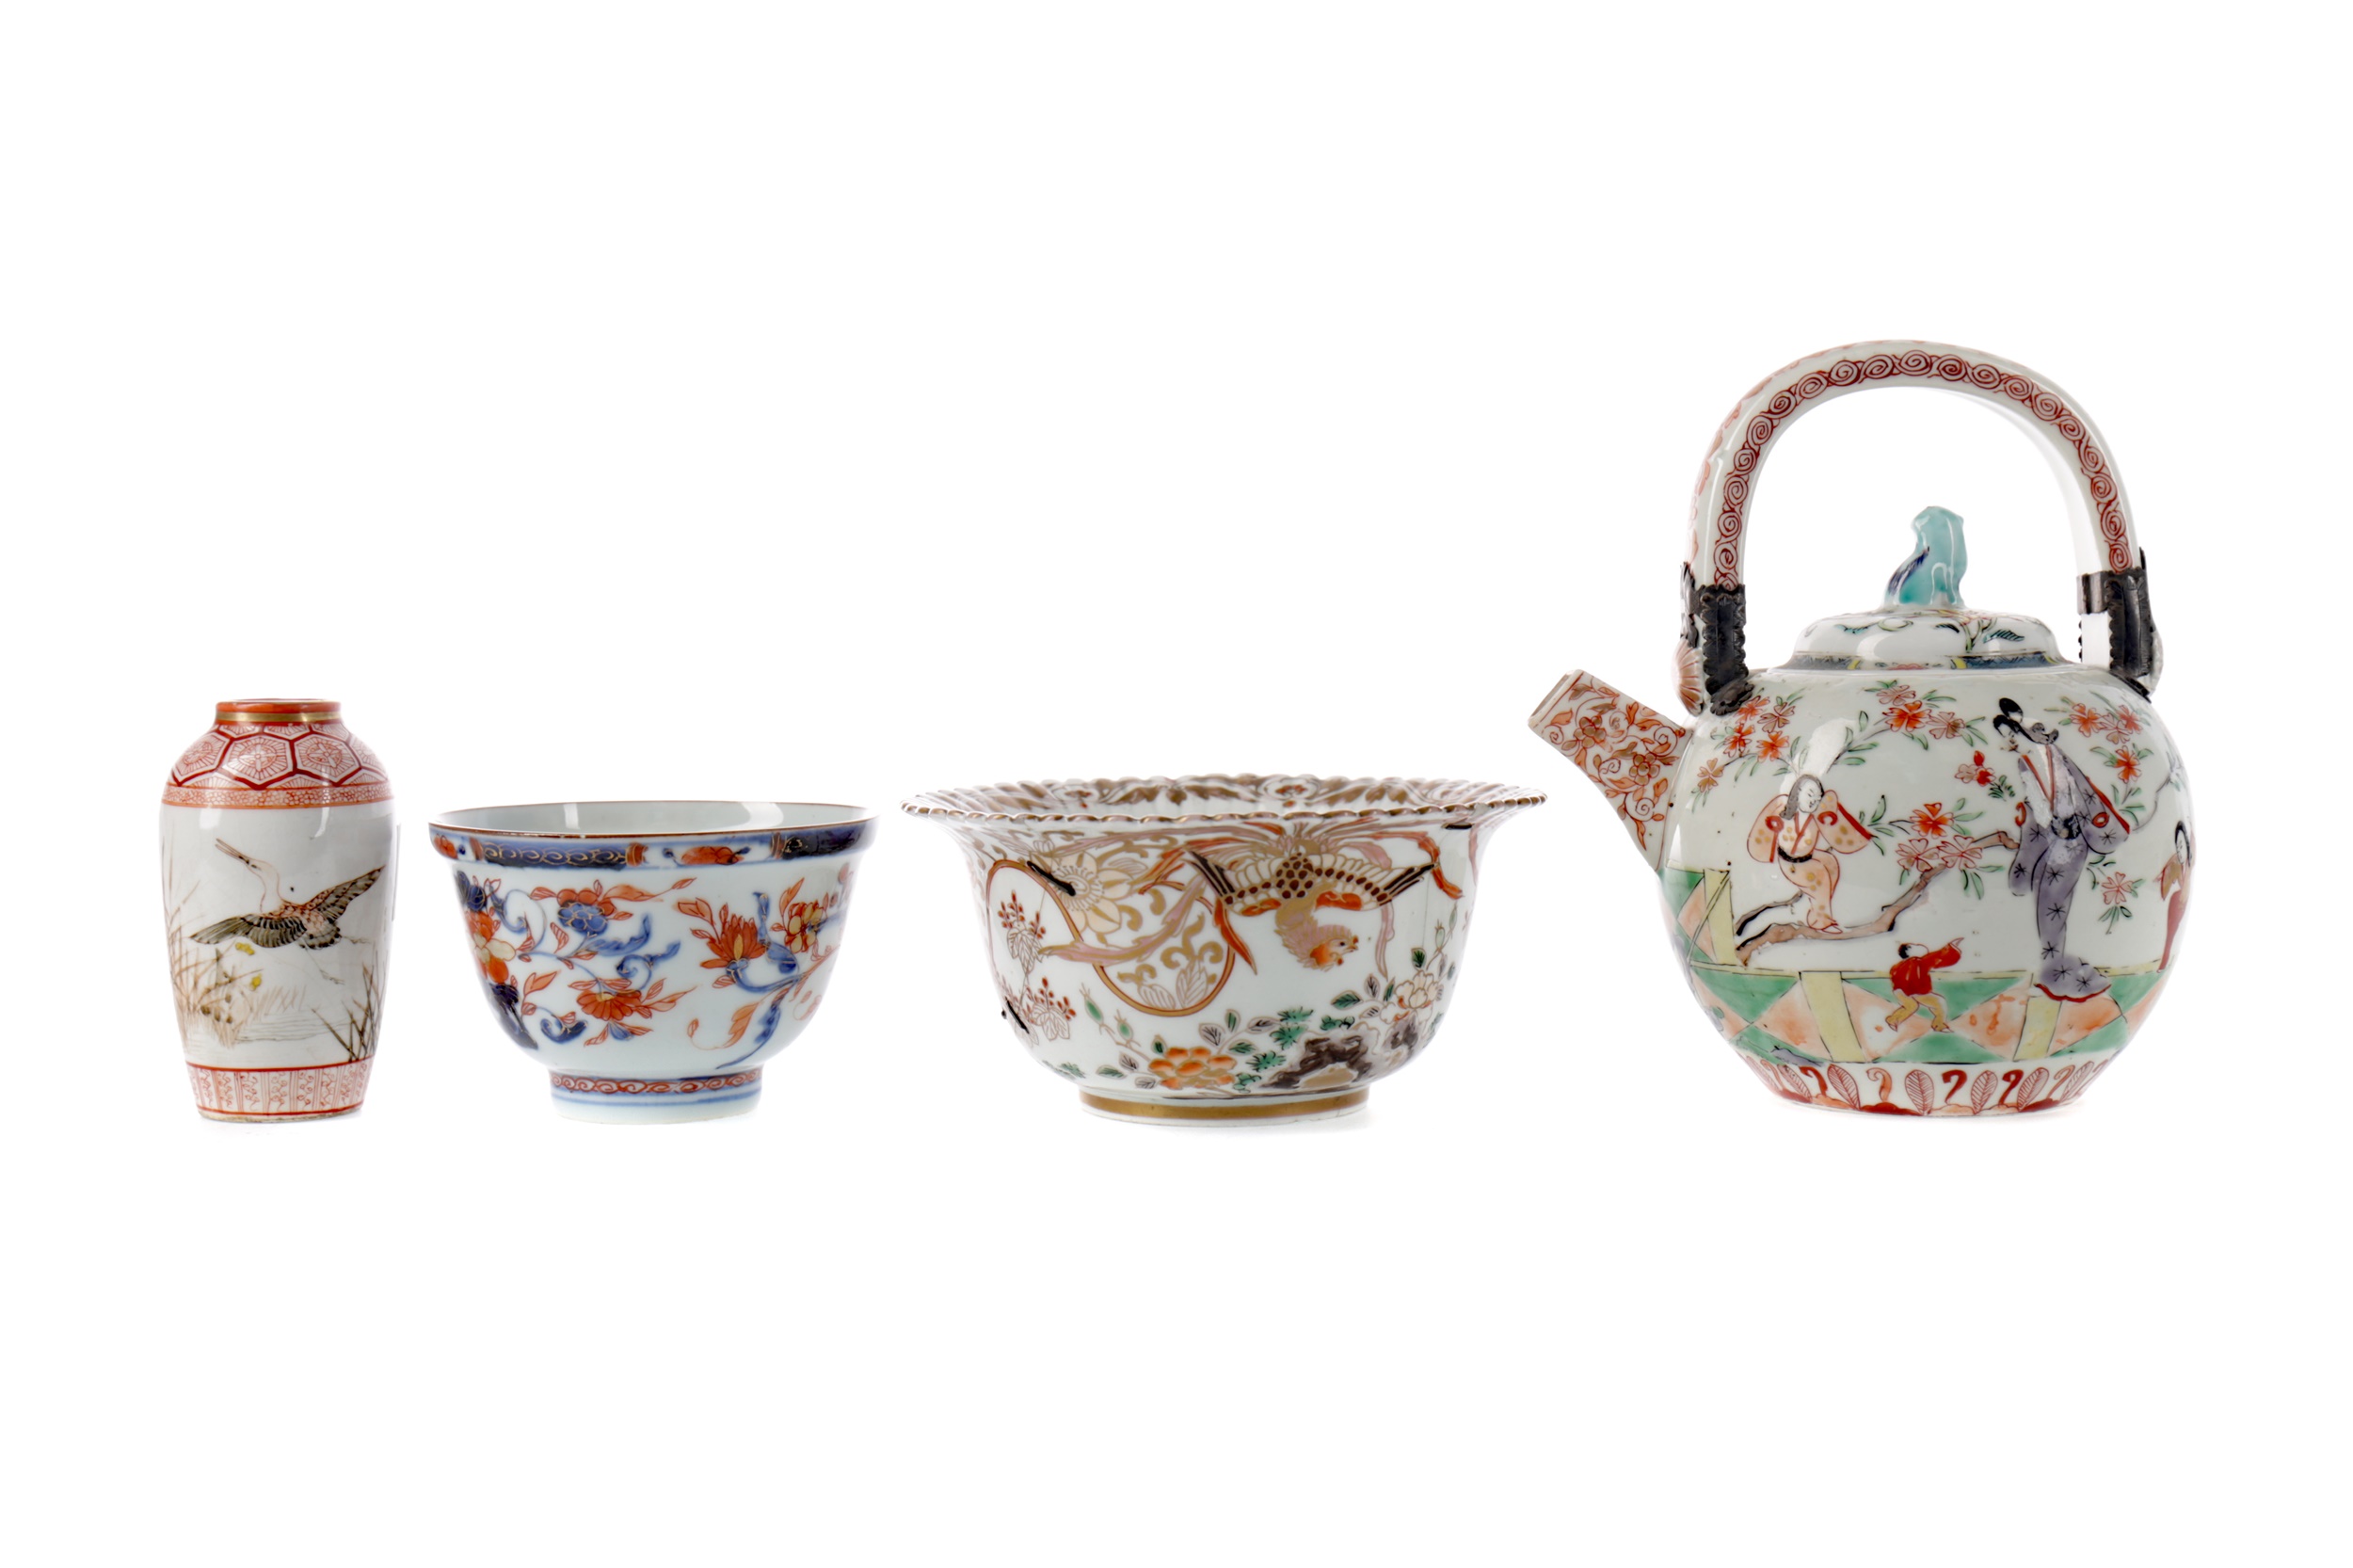 A LATE 19TH CENTURY JAPANESE KUTANI VASE, ALONG WITH THREE BOWLS AND A TEAPOT - Image 2 of 2